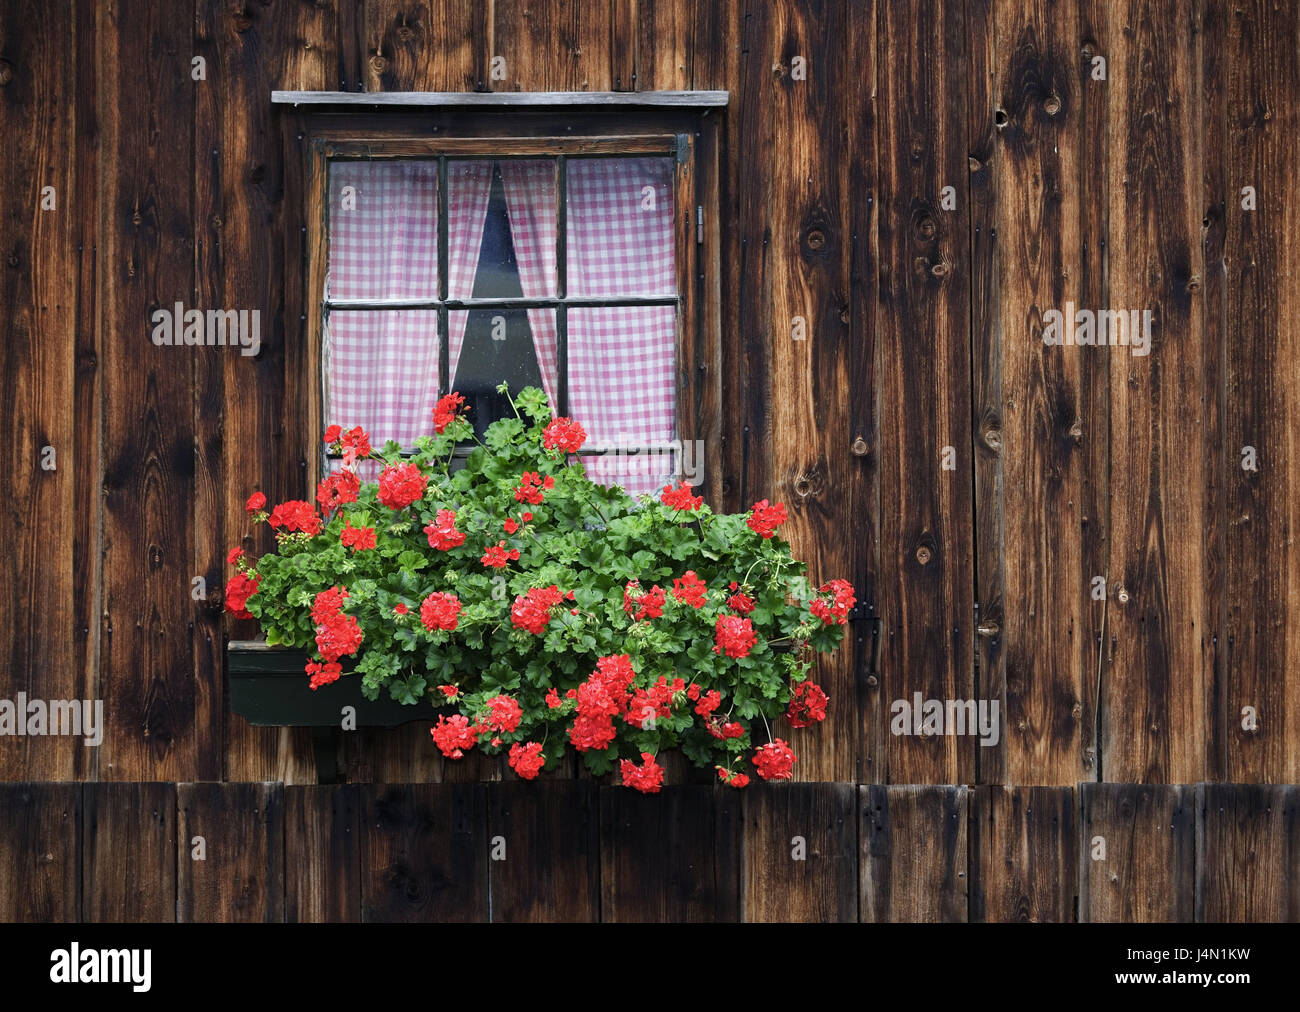 Steelworks, flower window, wooden hut, mountain steelworks, house, facade, old, rurally, rustic, farmhouse, wooden house, geraniums, flowers, window box, Austria, salt chamber property, Stock Photo